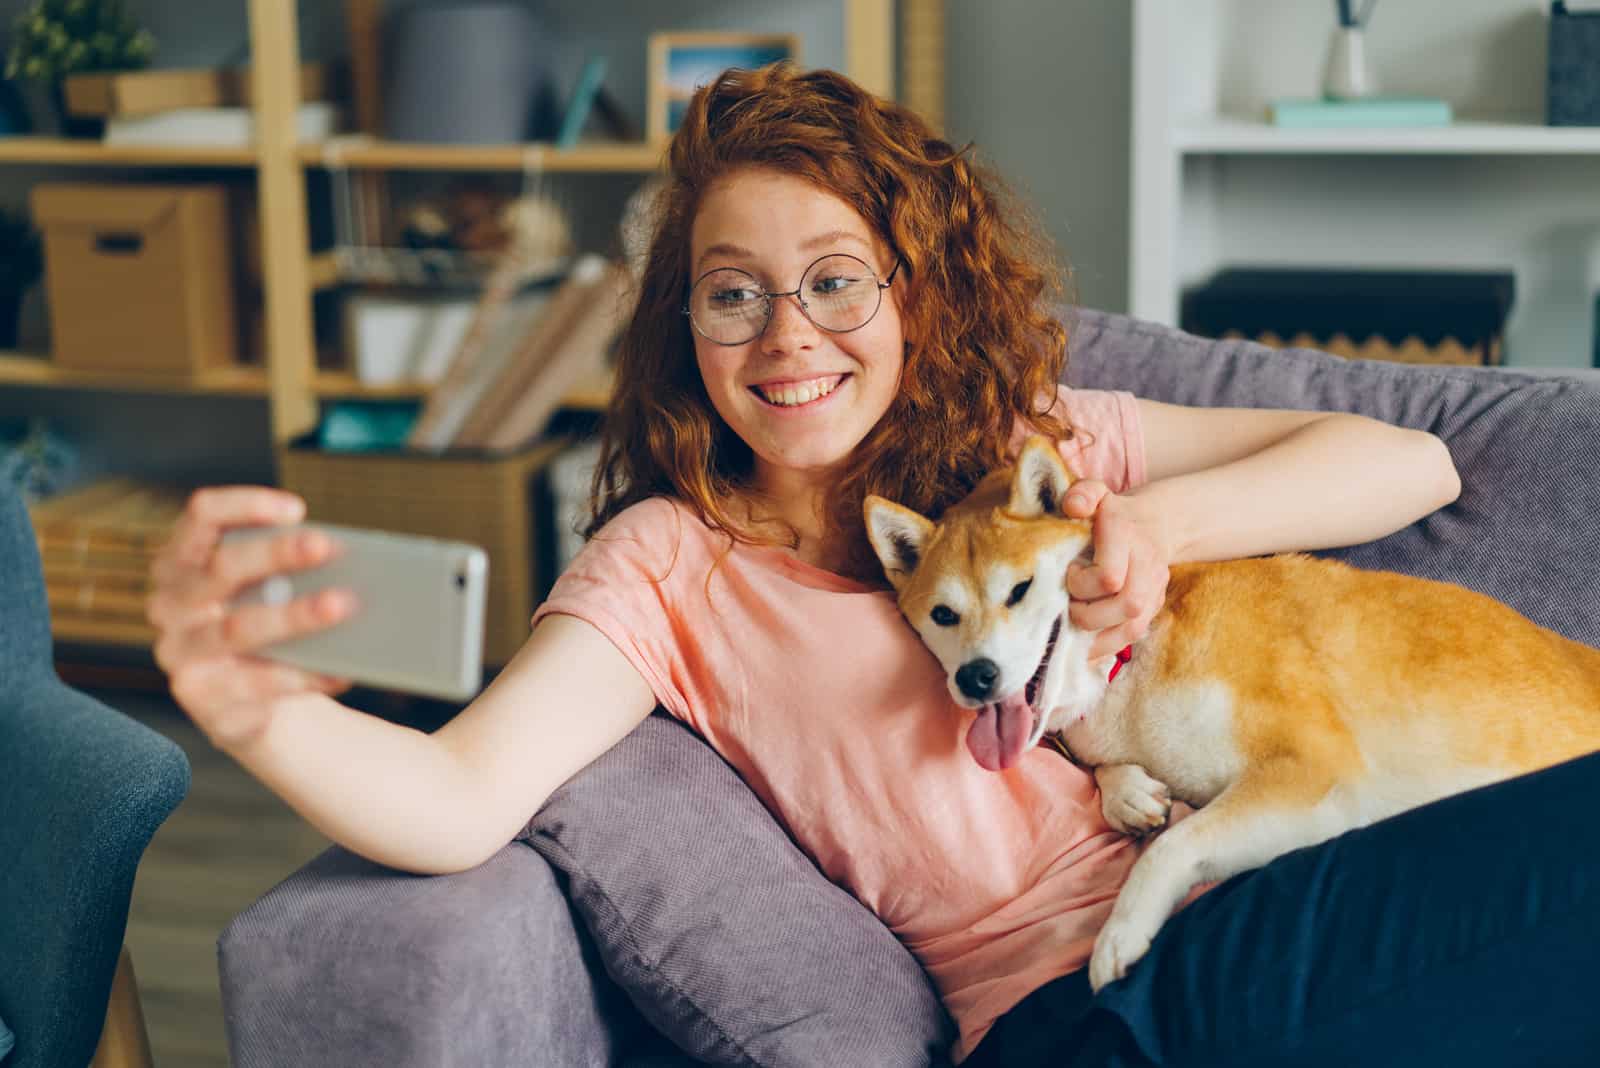 a smiling woman takes a picture with a dog